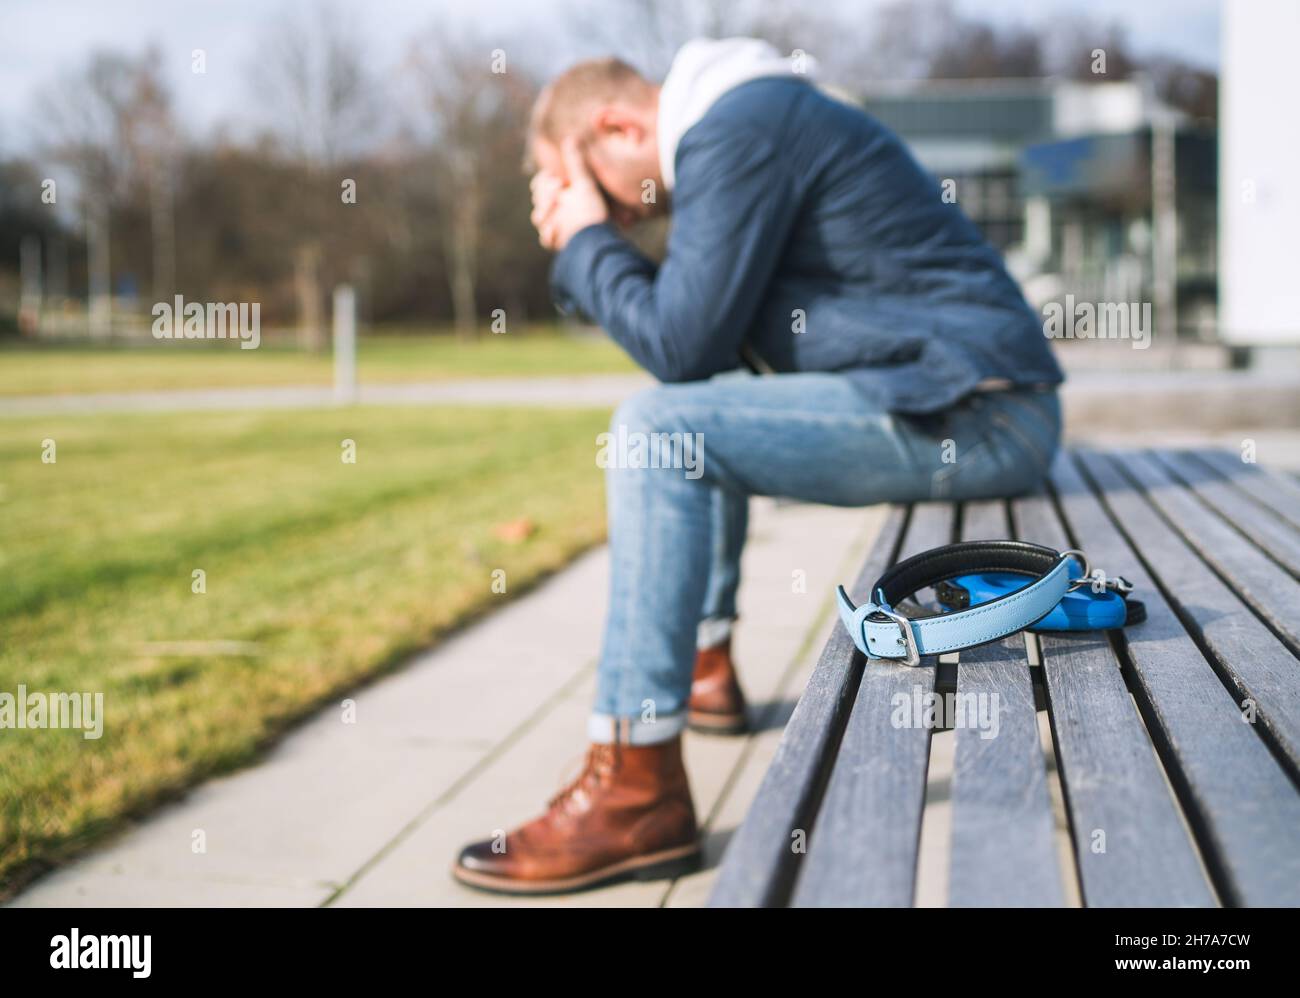 Broken with grief man dog owner is grieving sitting on a bench with the lovely pet collar and deep weeping about animal loss. Home pets relatives and Stock Photo